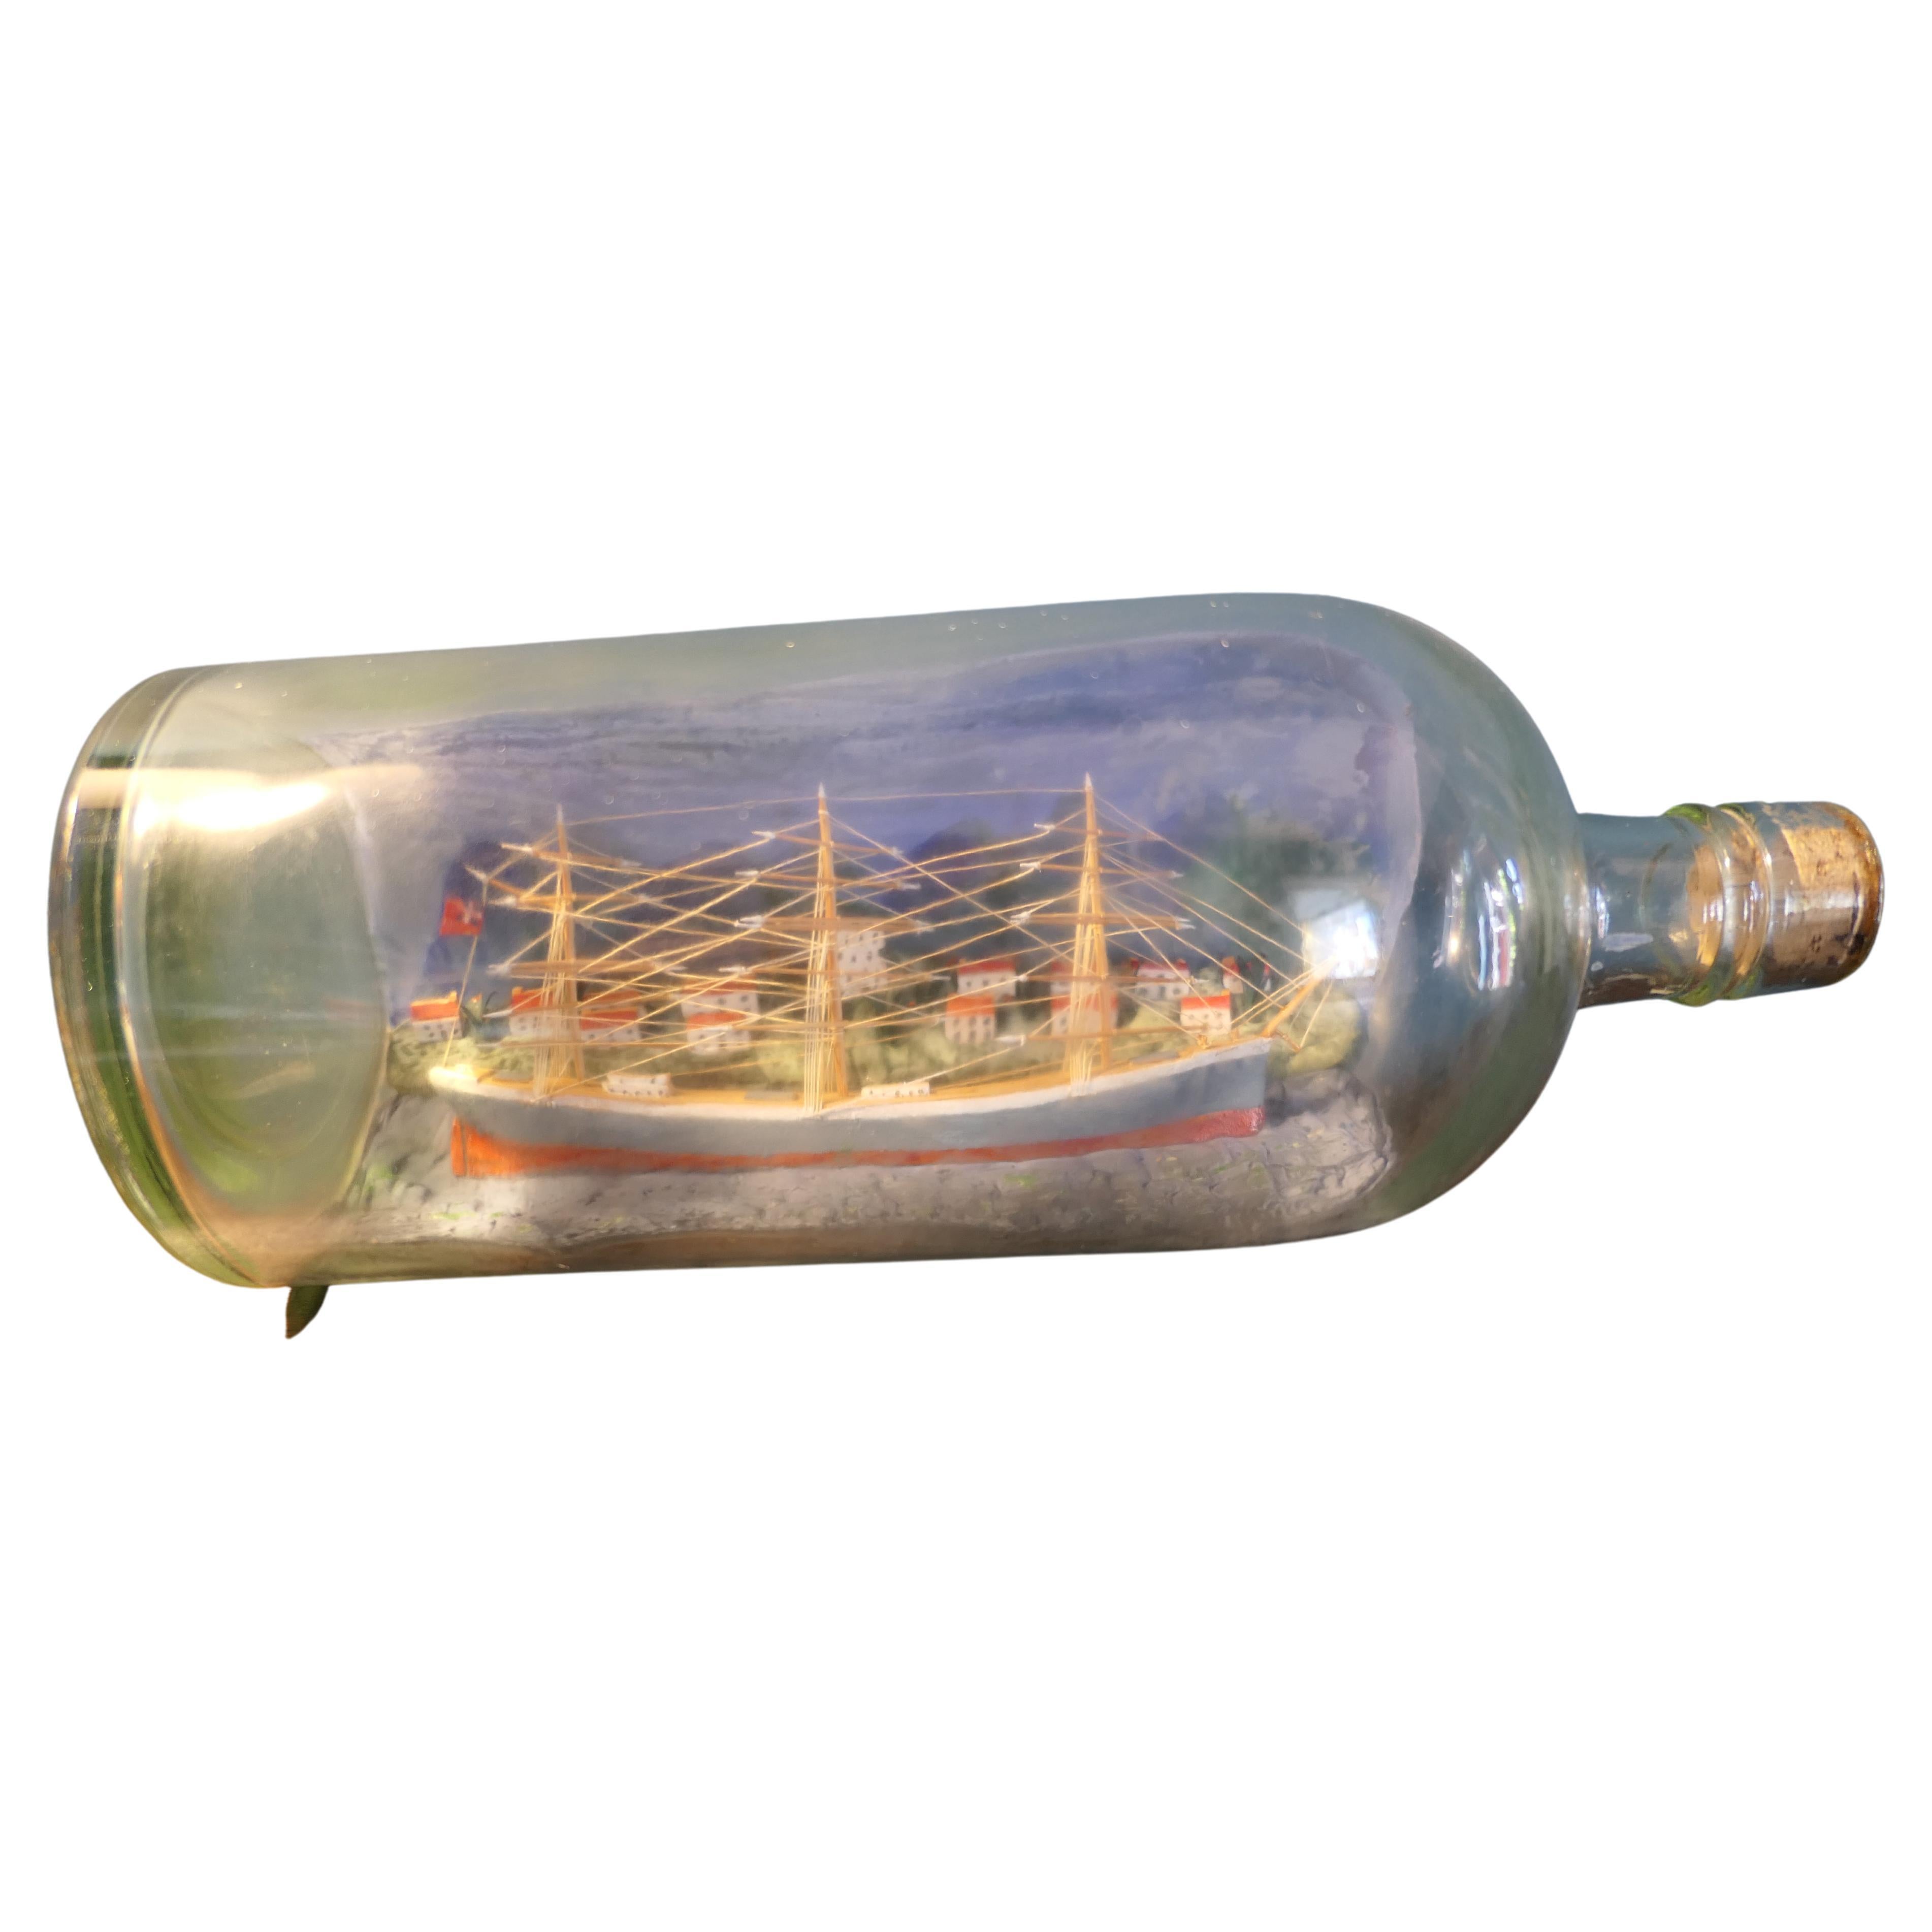 3 Masted Sailing Ship in a Bottle For Sale